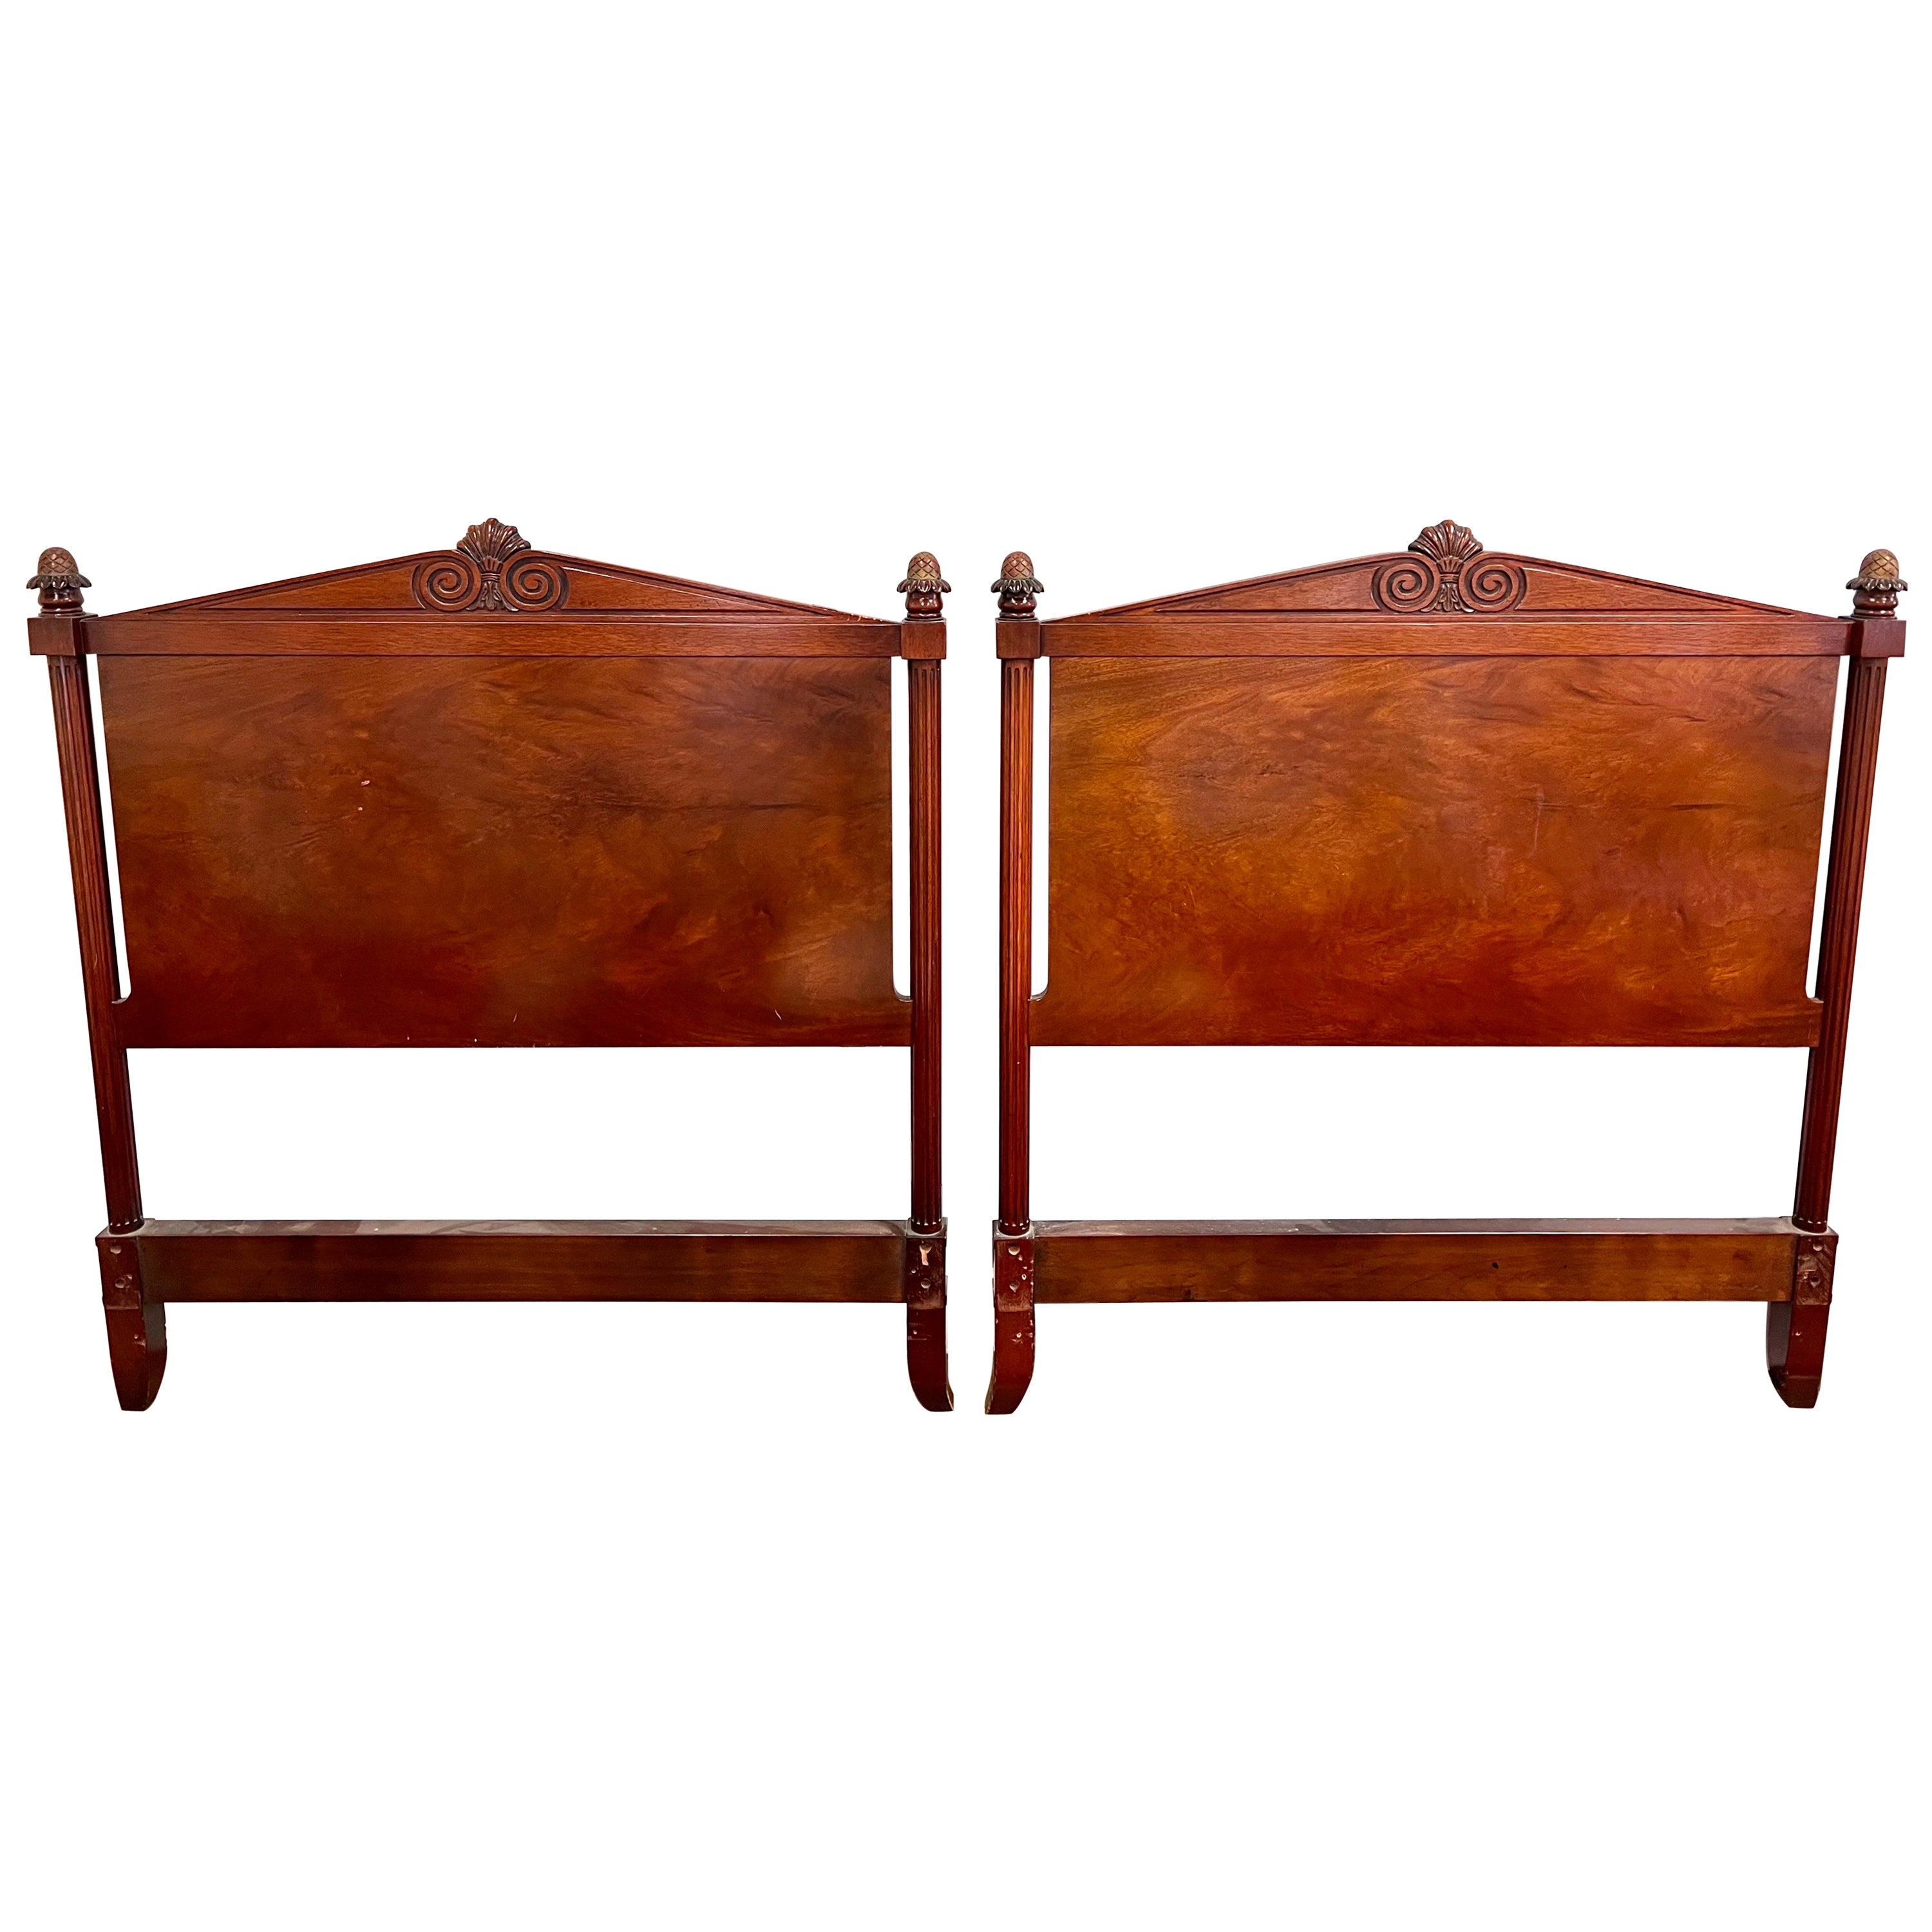 Pair of Coveted Beacon Hill Furniture Collection Mahogany Twin Headboards